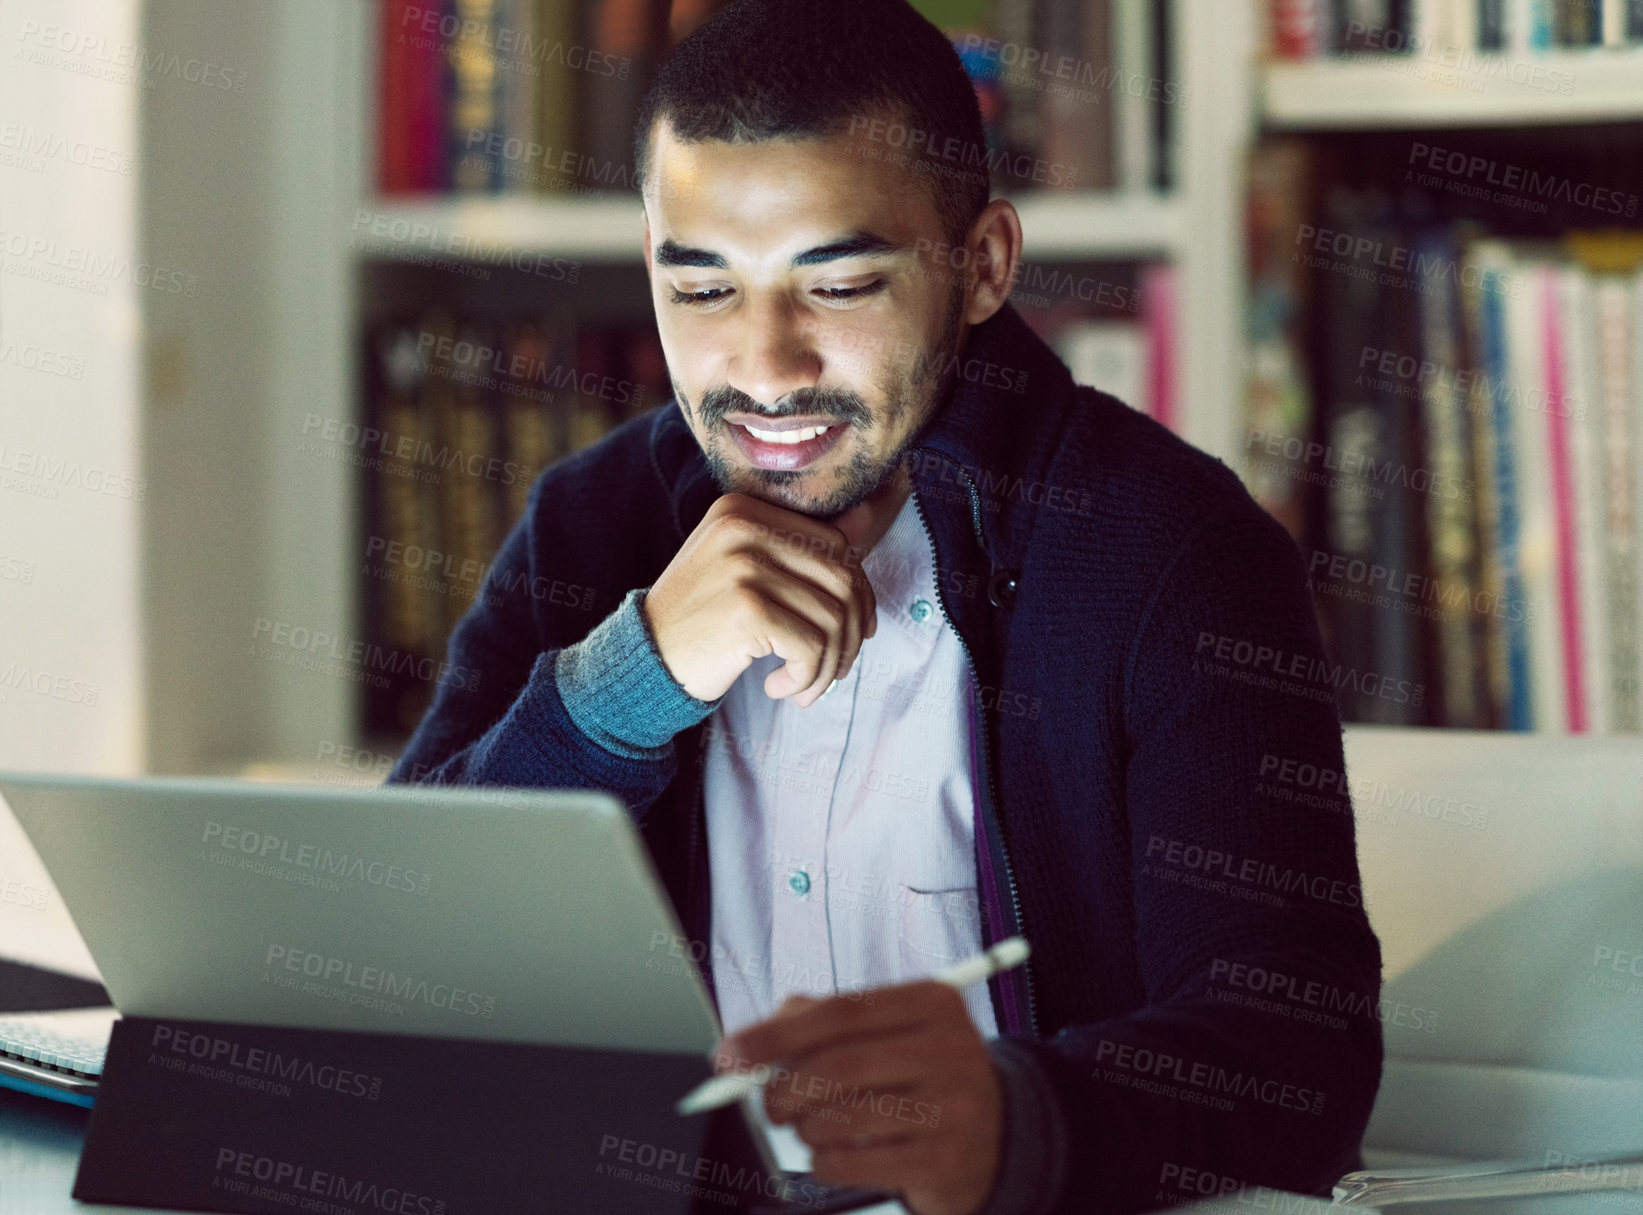 Buy stock photo Shot of a smiling young man working on a digital tablet in his home office in the early evening